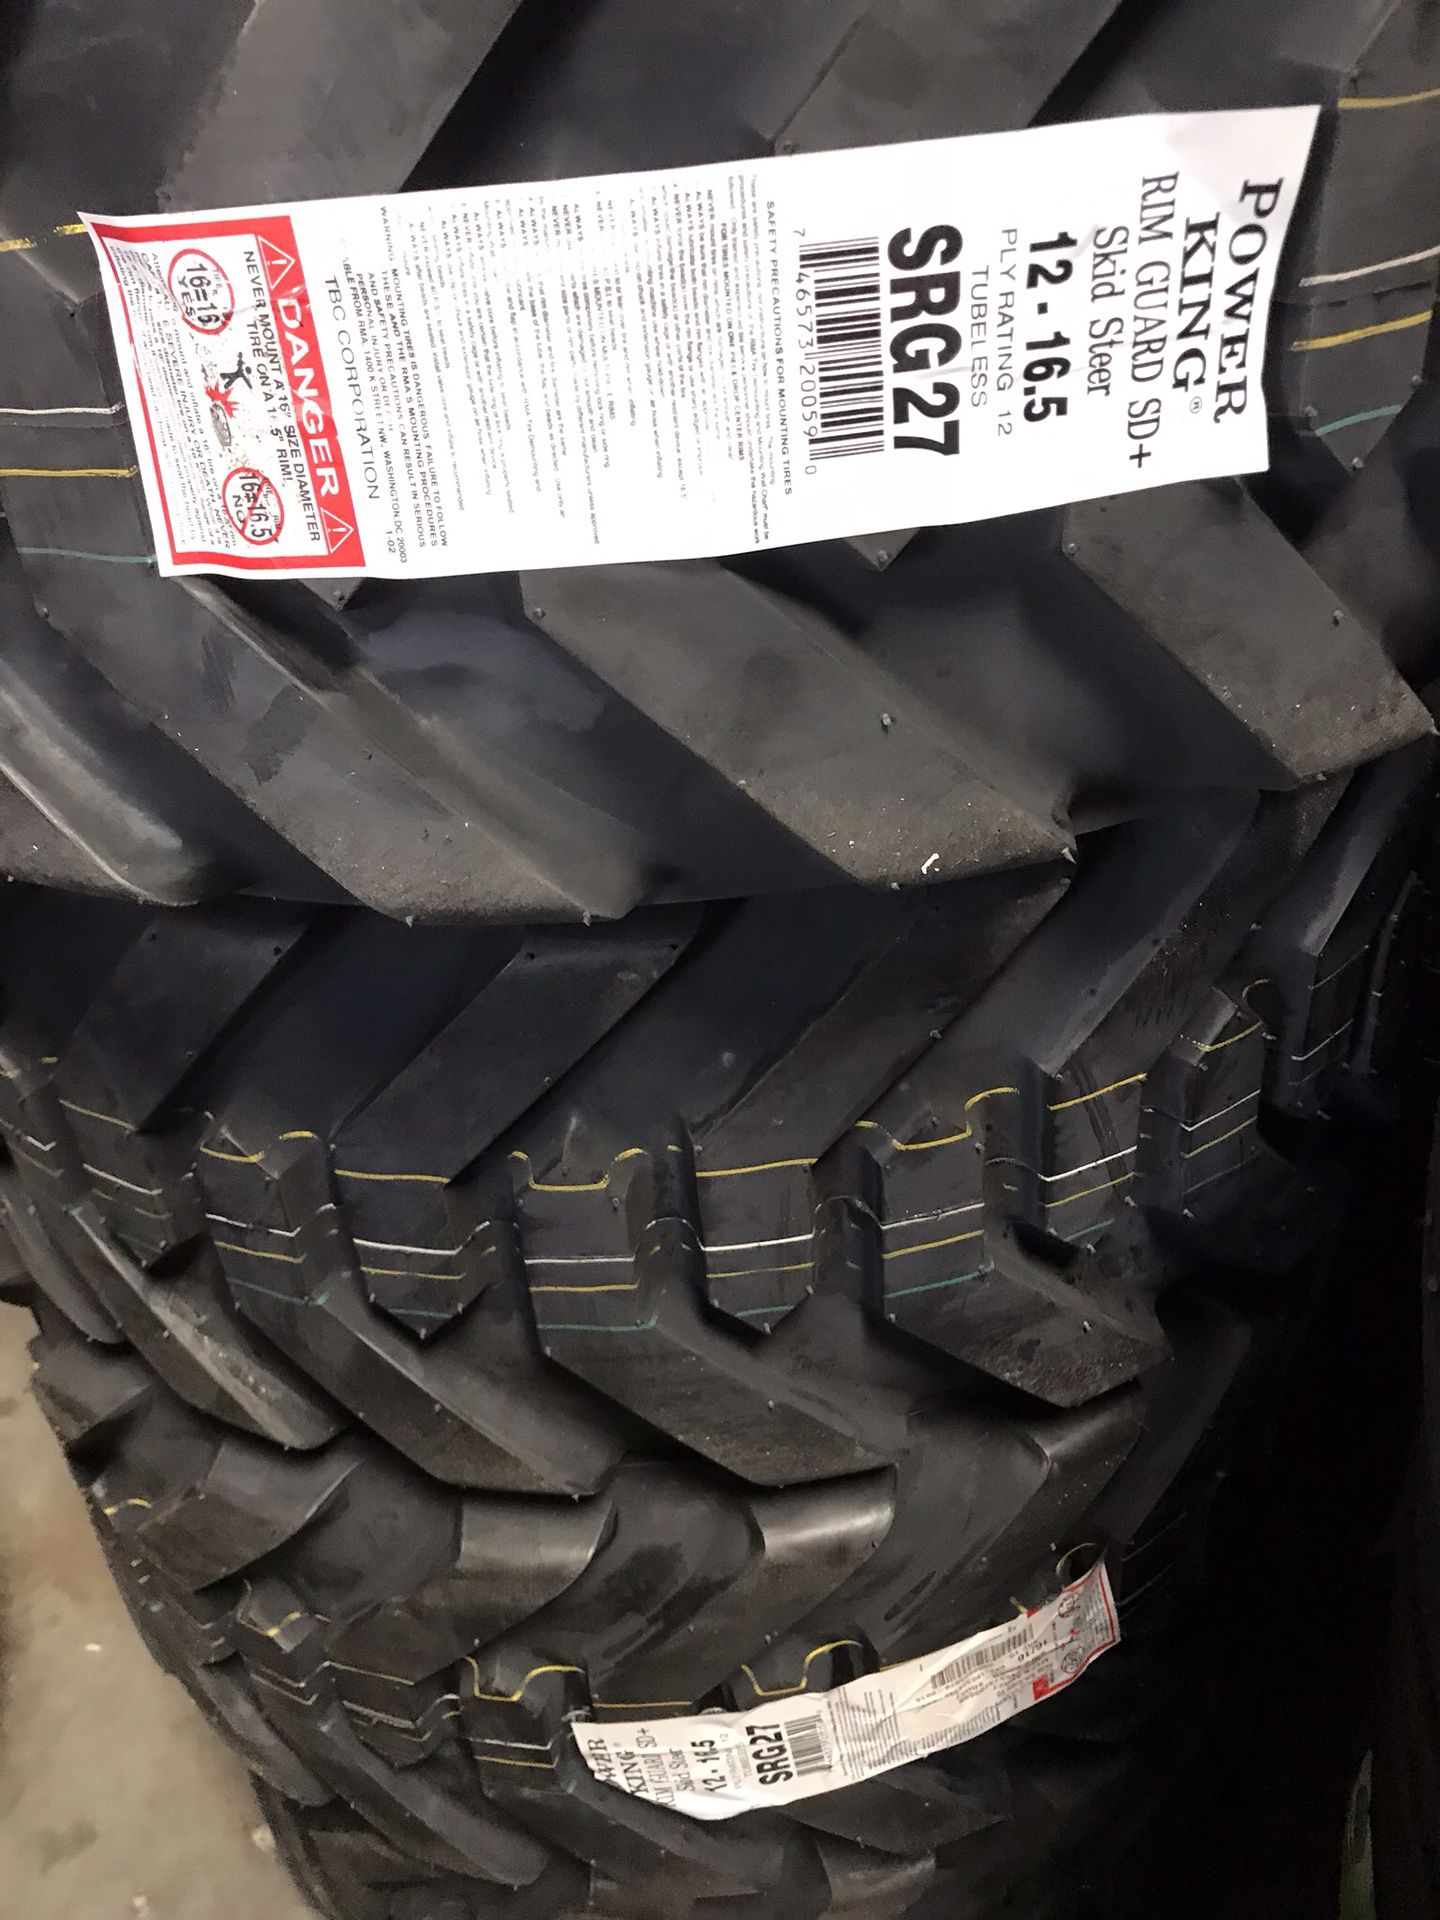 4x Steer skid tire 12-16.5 12 ply $520 cash no lowball